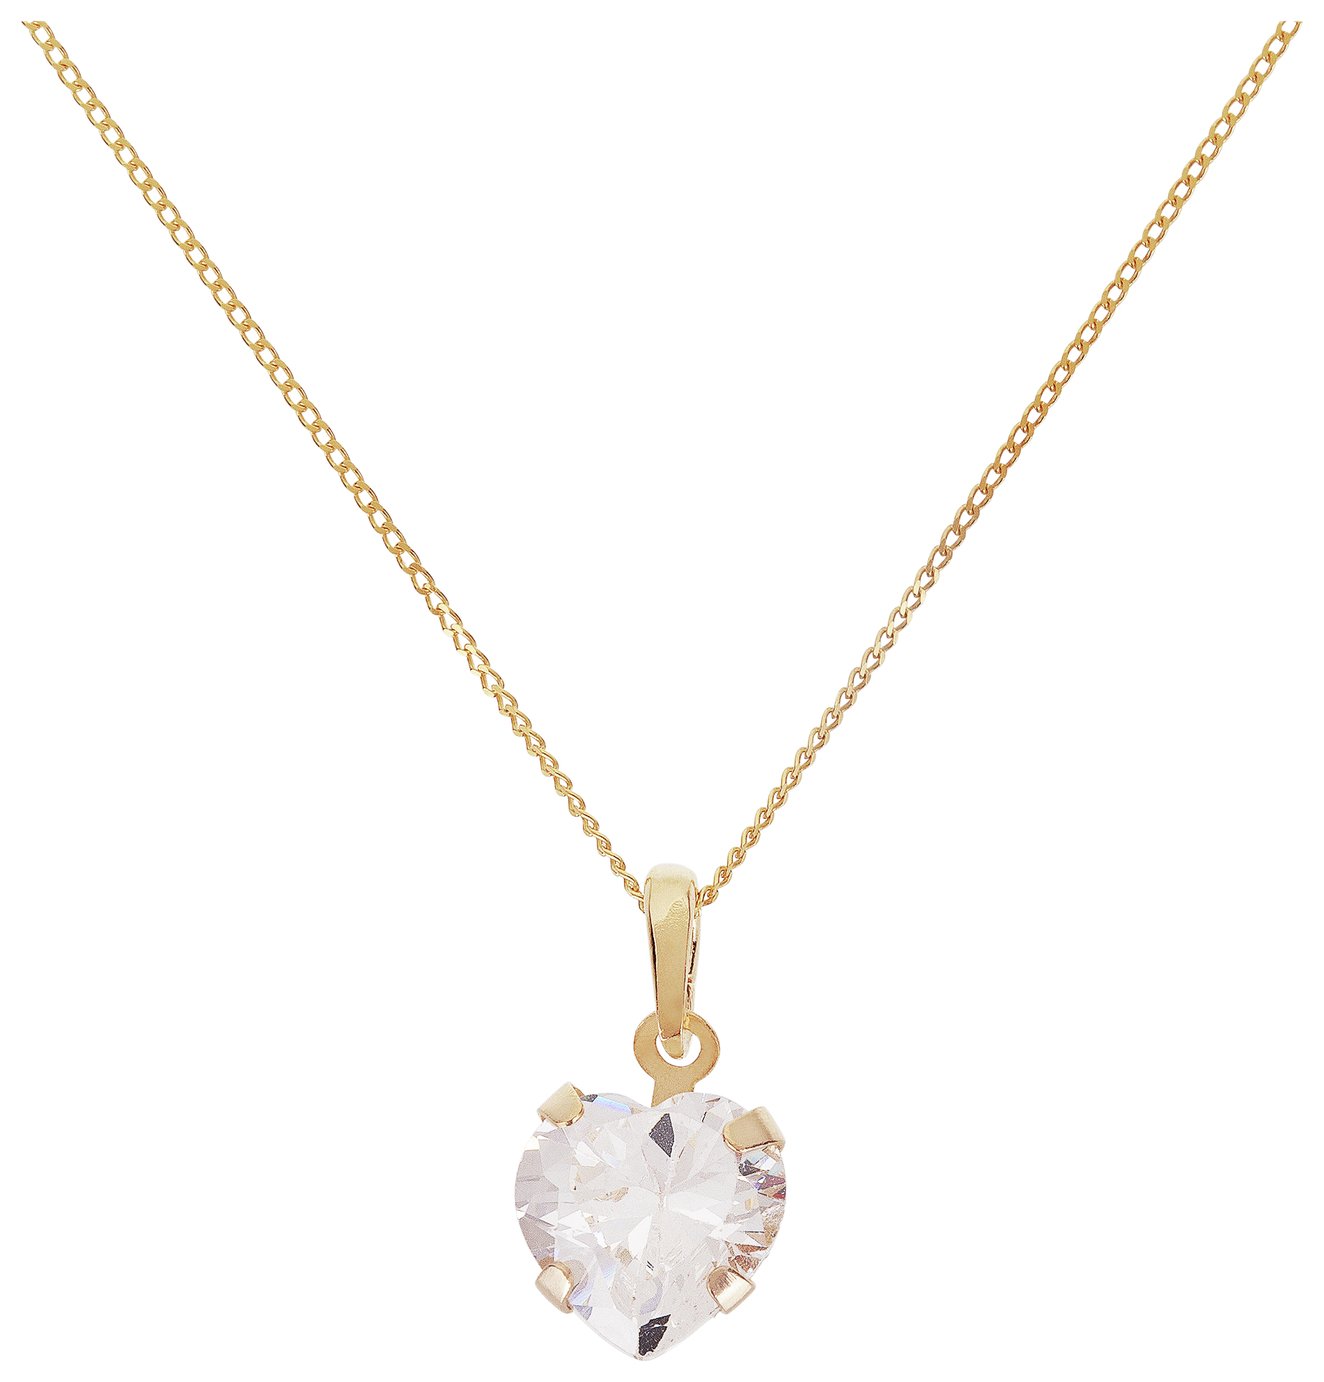 Revere 9ct Gold Heart Pendant 16 Inch Necklace